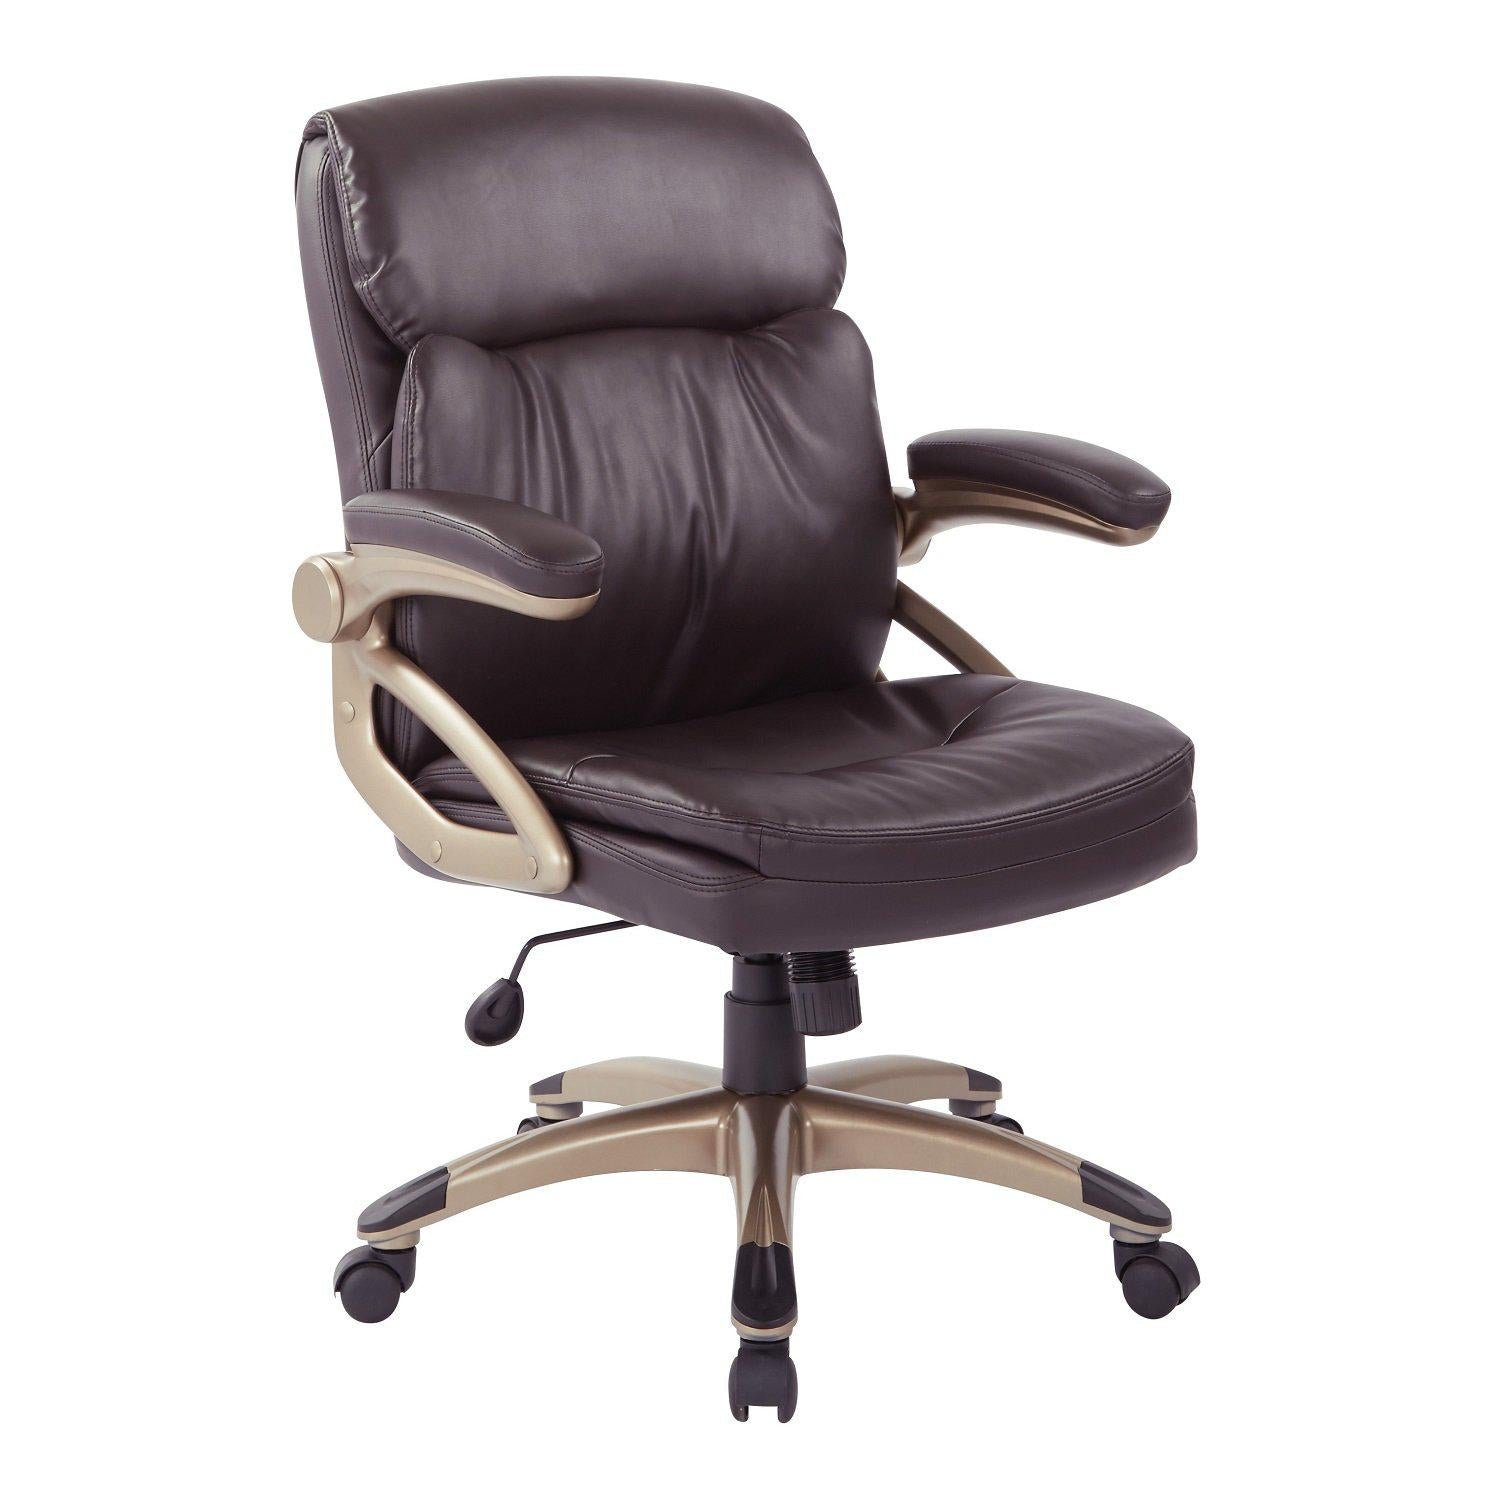 Mid Back Bonded Leather Executive Manager's Chair, Cocoa Frame/Espresso Upholstery